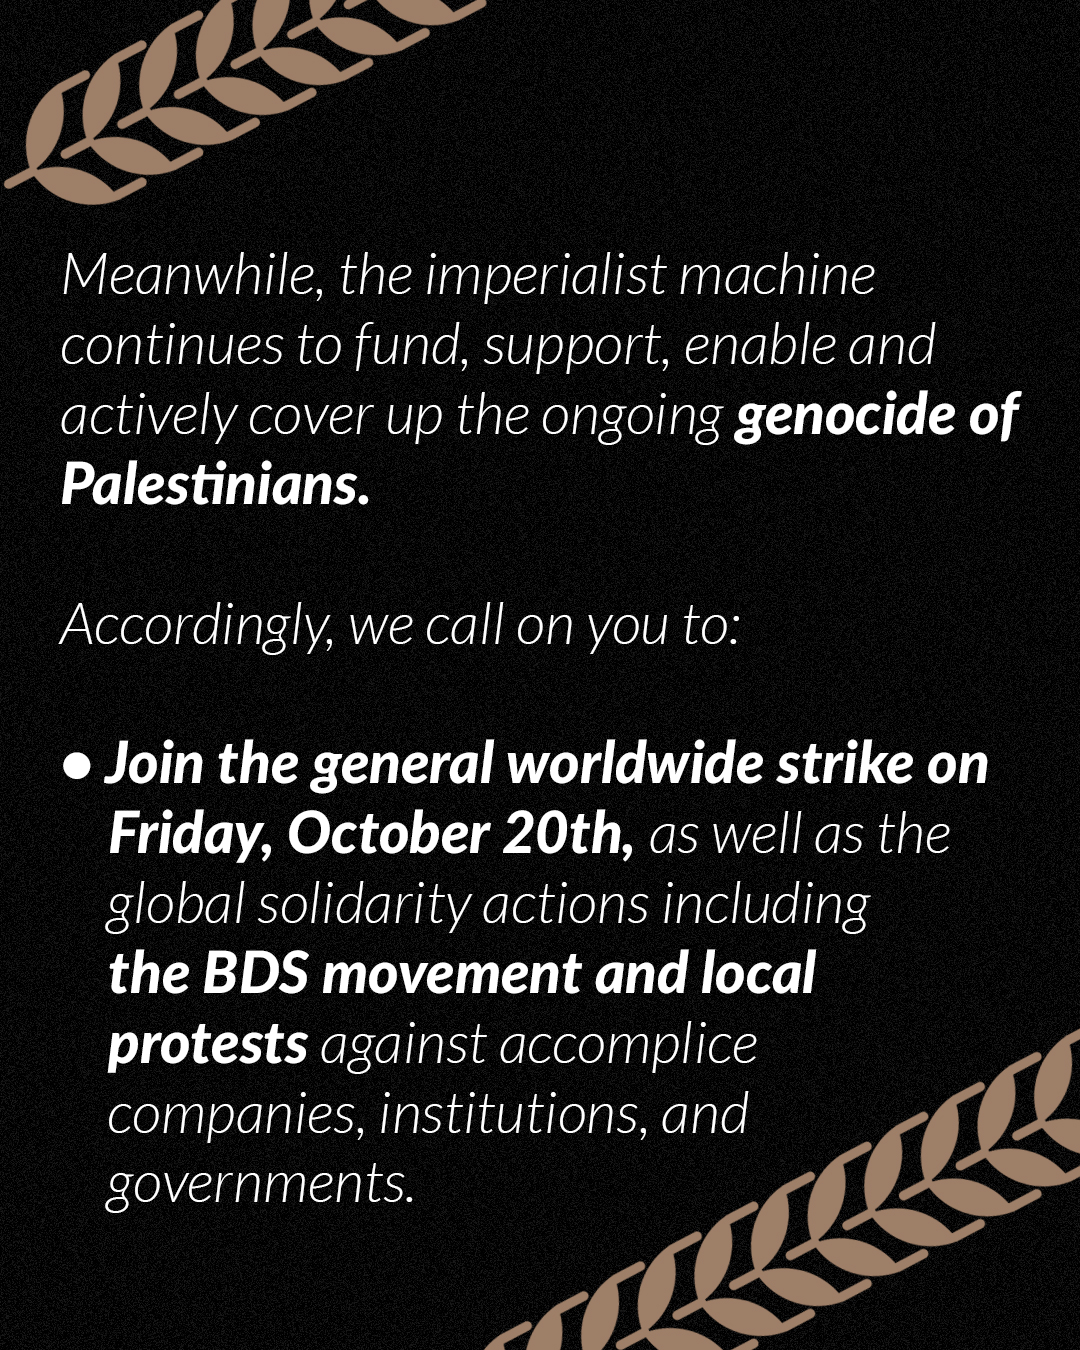 Meanwhile, the imperialist machine continues to fund, support, enable and actively cover up the ongoing genocide of Palestinians. And so we call you to: Join the general worldwide strike on Friday, October 20th, as well as the global solidarity actions including the BDS movement and local protests against accomplice companies, institutions, and governments.